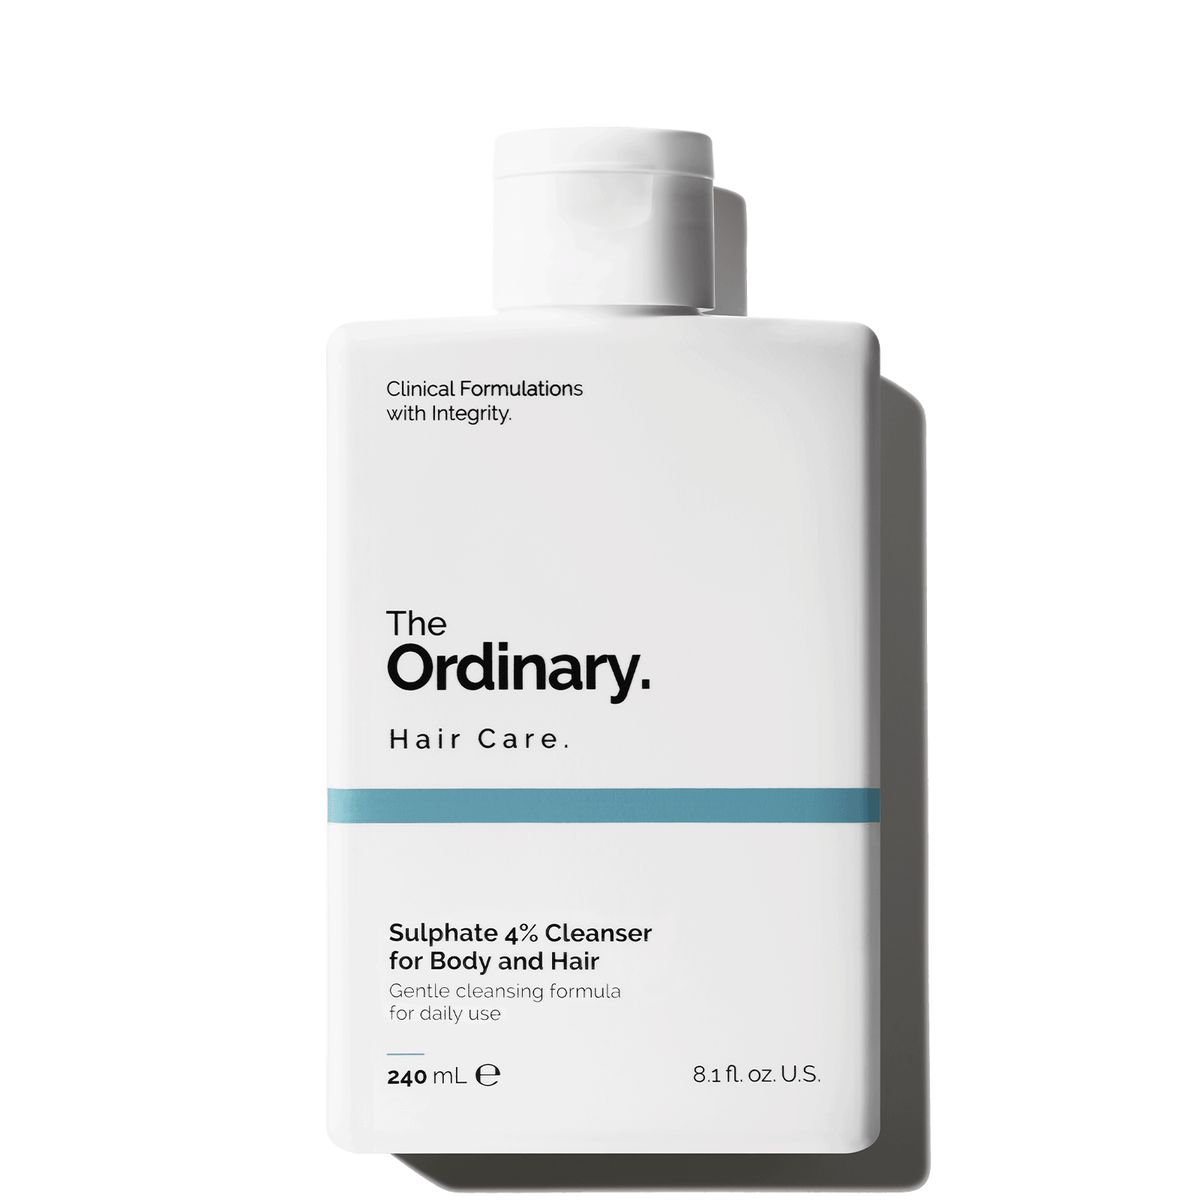 Sulphate 4% Cleanser for Body and HairSulphate 4% Cleanser for Body and Hair | The Ordinary